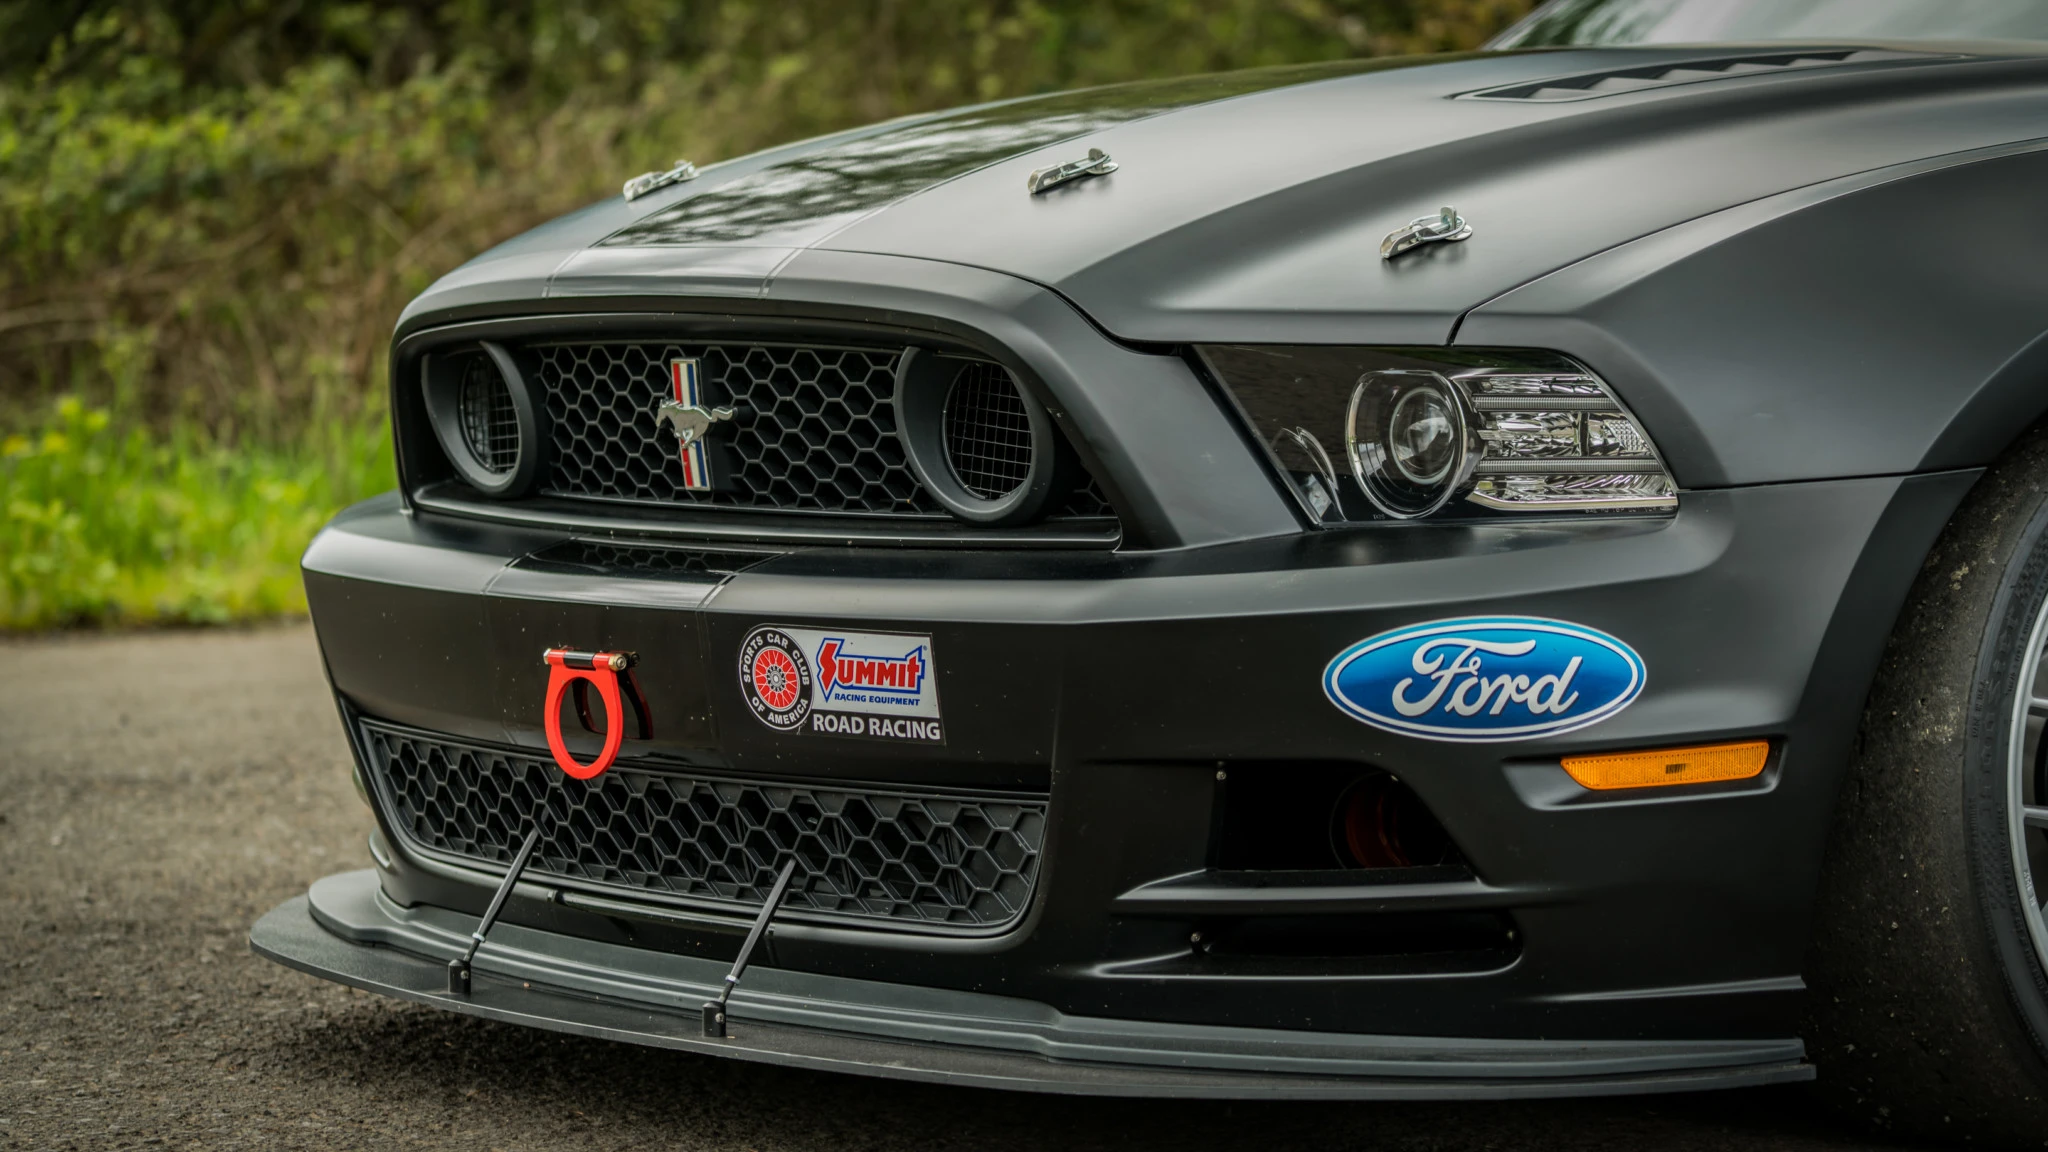 Ford Mustang Boss 302S with Recaro XL driver's seat and personalized content